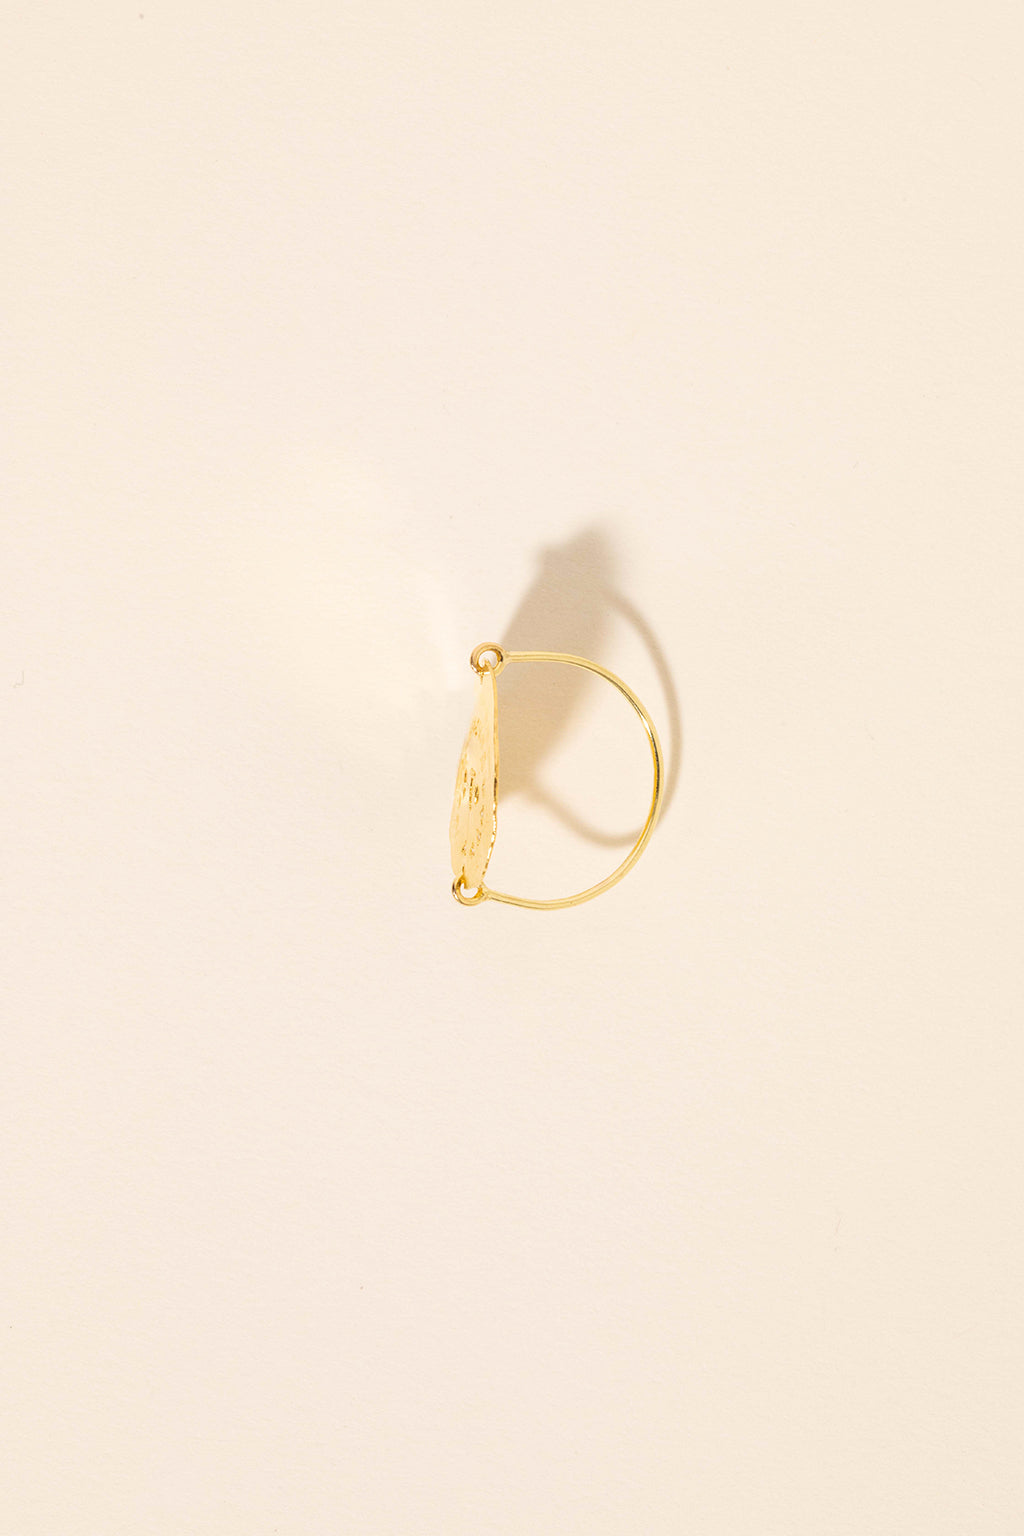 N°03 Collection 01 | BAGUE - TREMISSIS